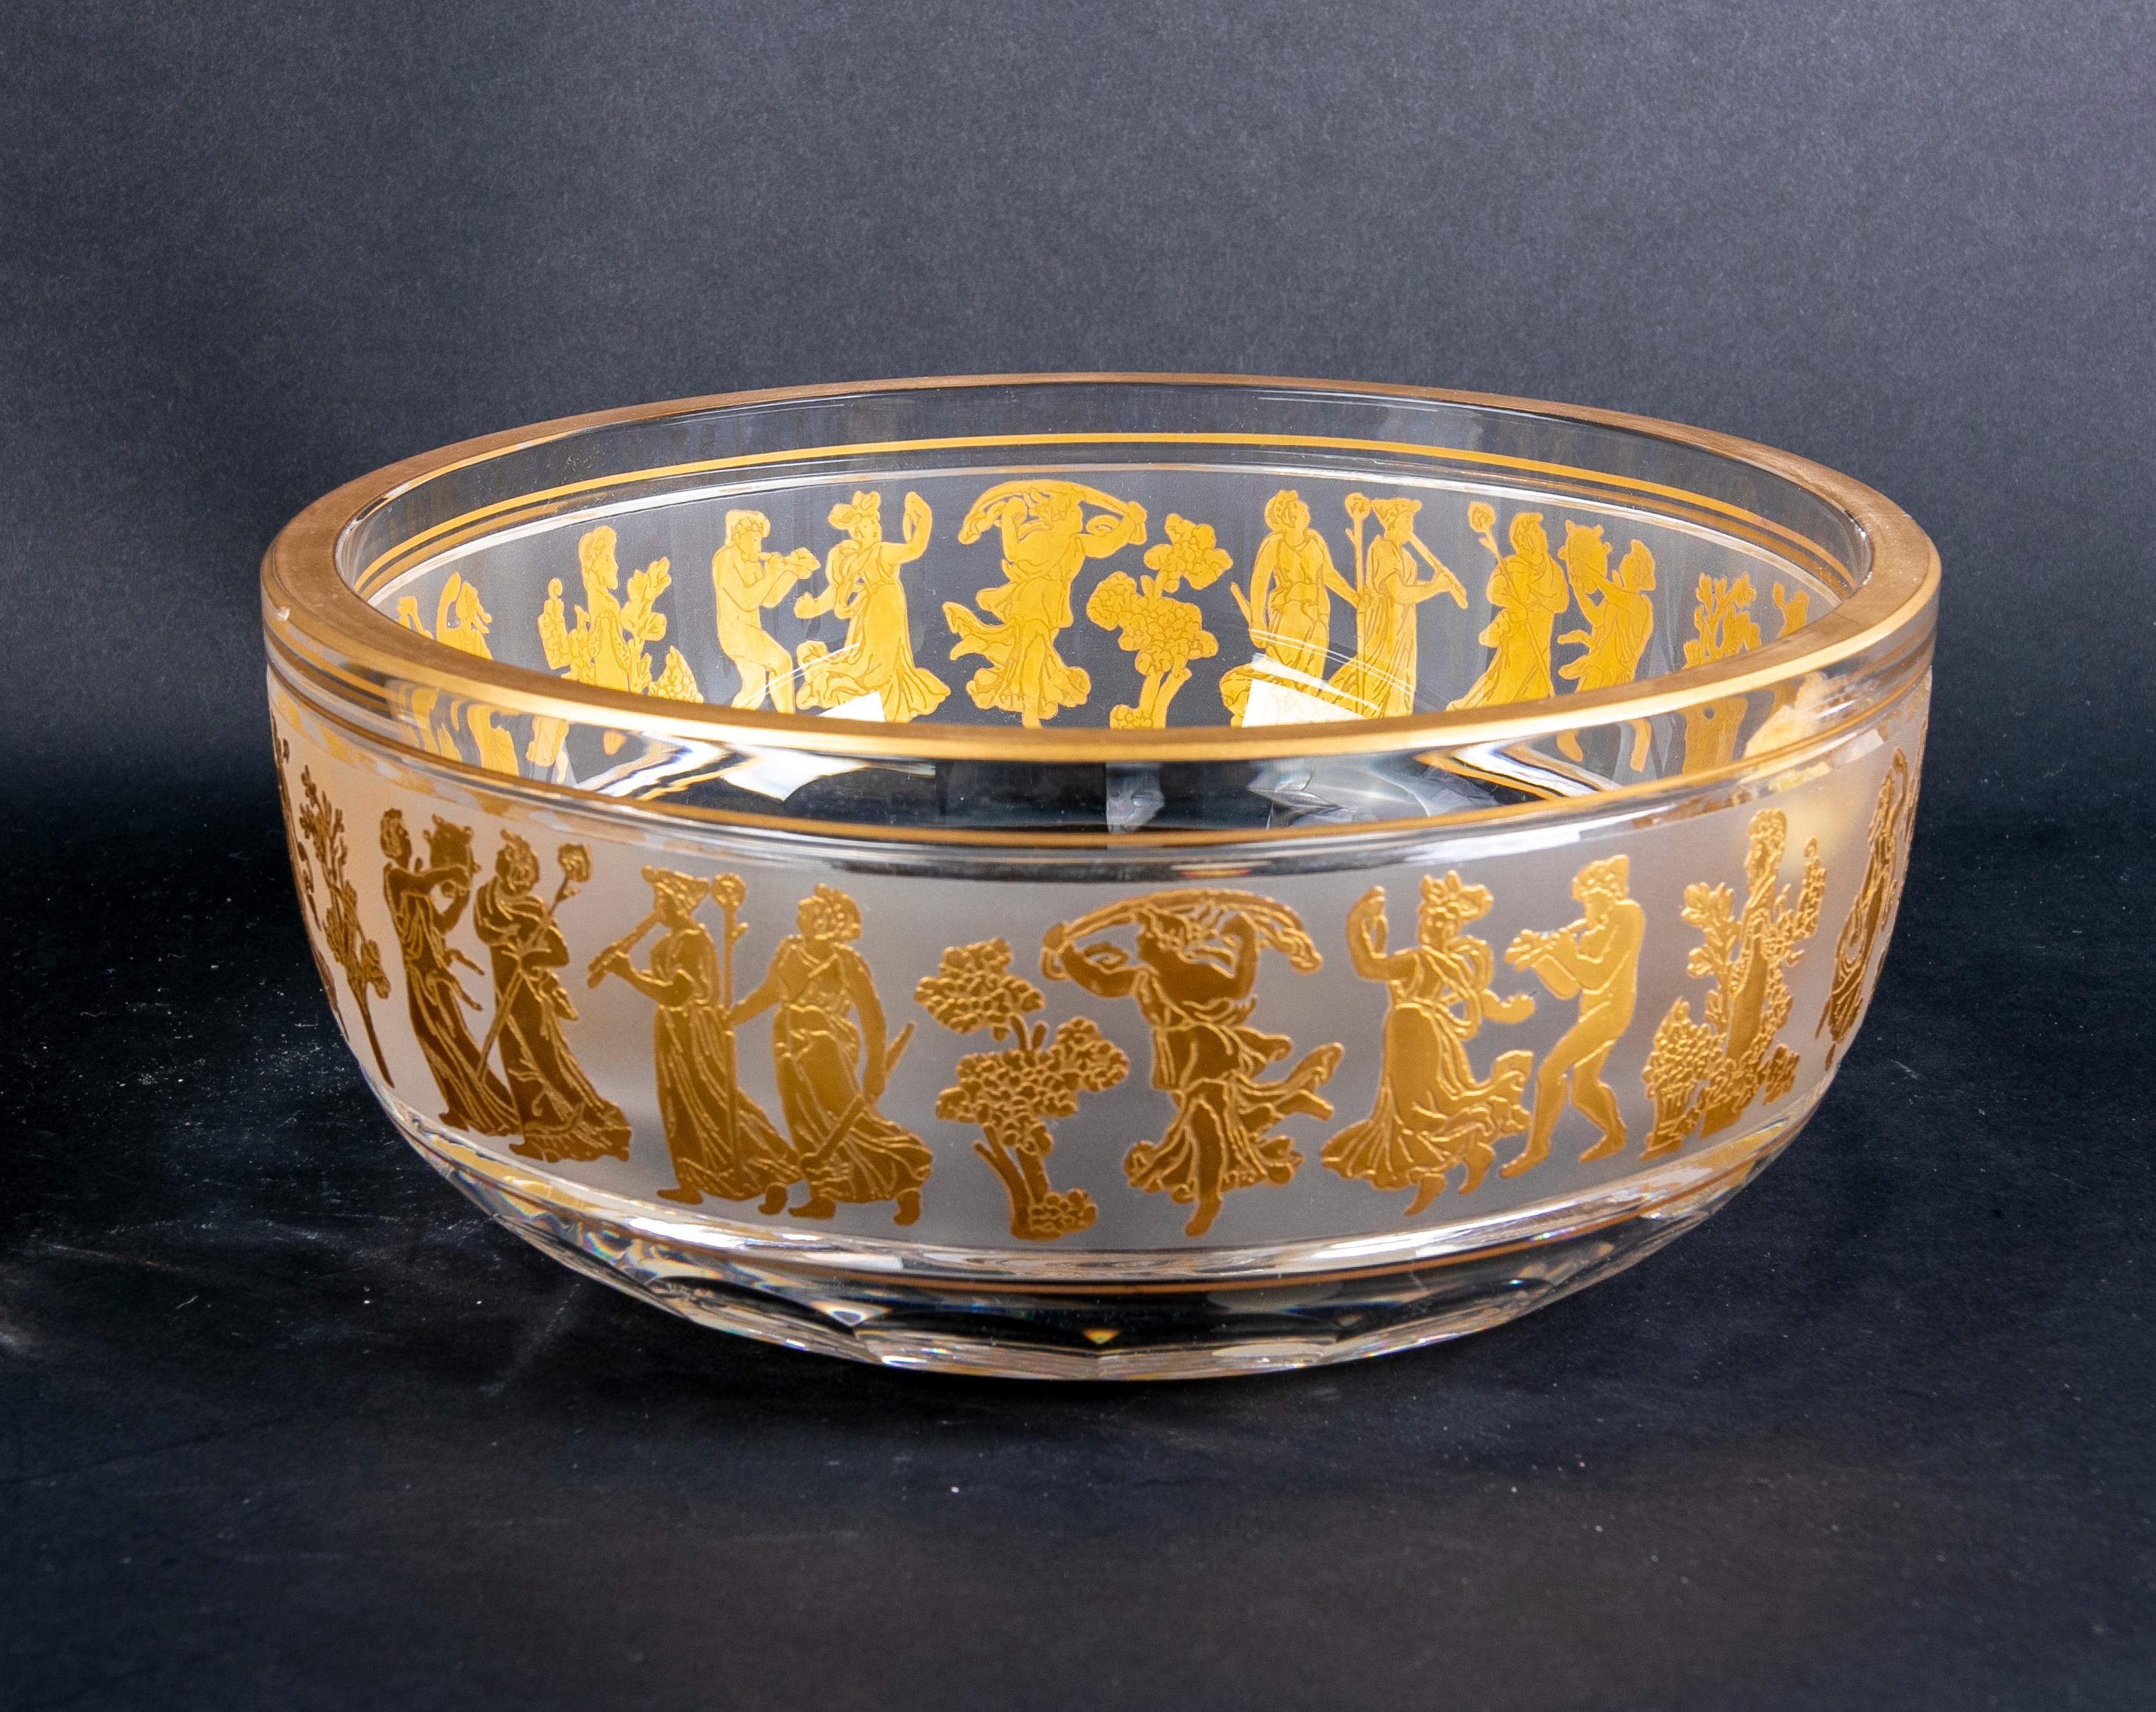 Glass centrepiece with a frieze and gold-plated Roman type scenes.